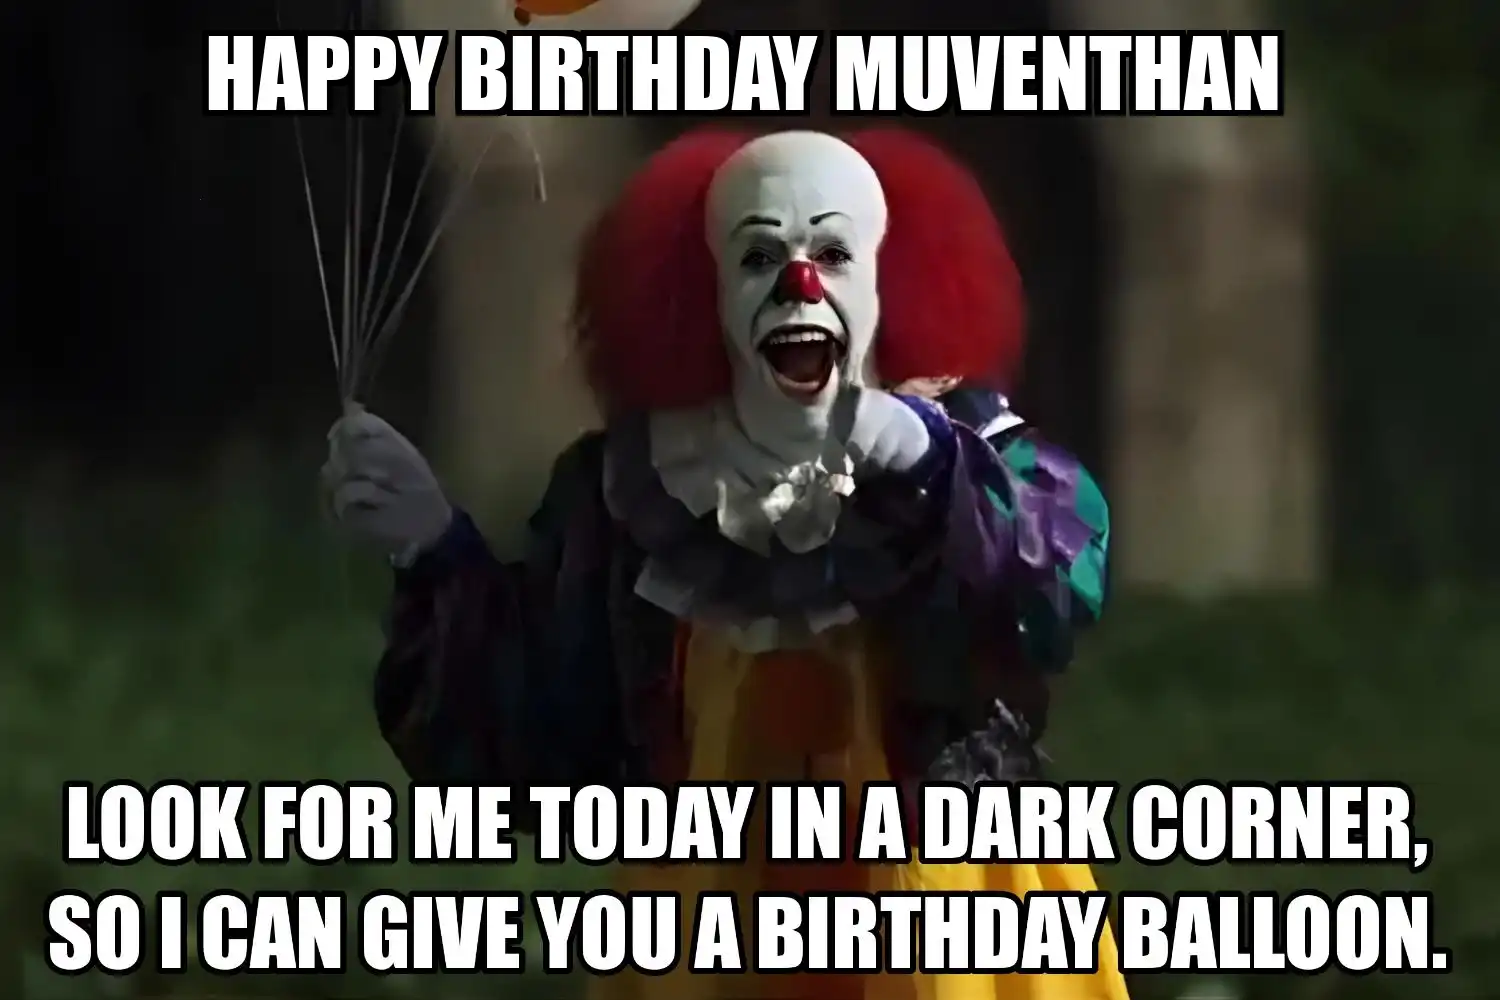 Happy Birthday Muventhan I Can Give You A Balloon Meme